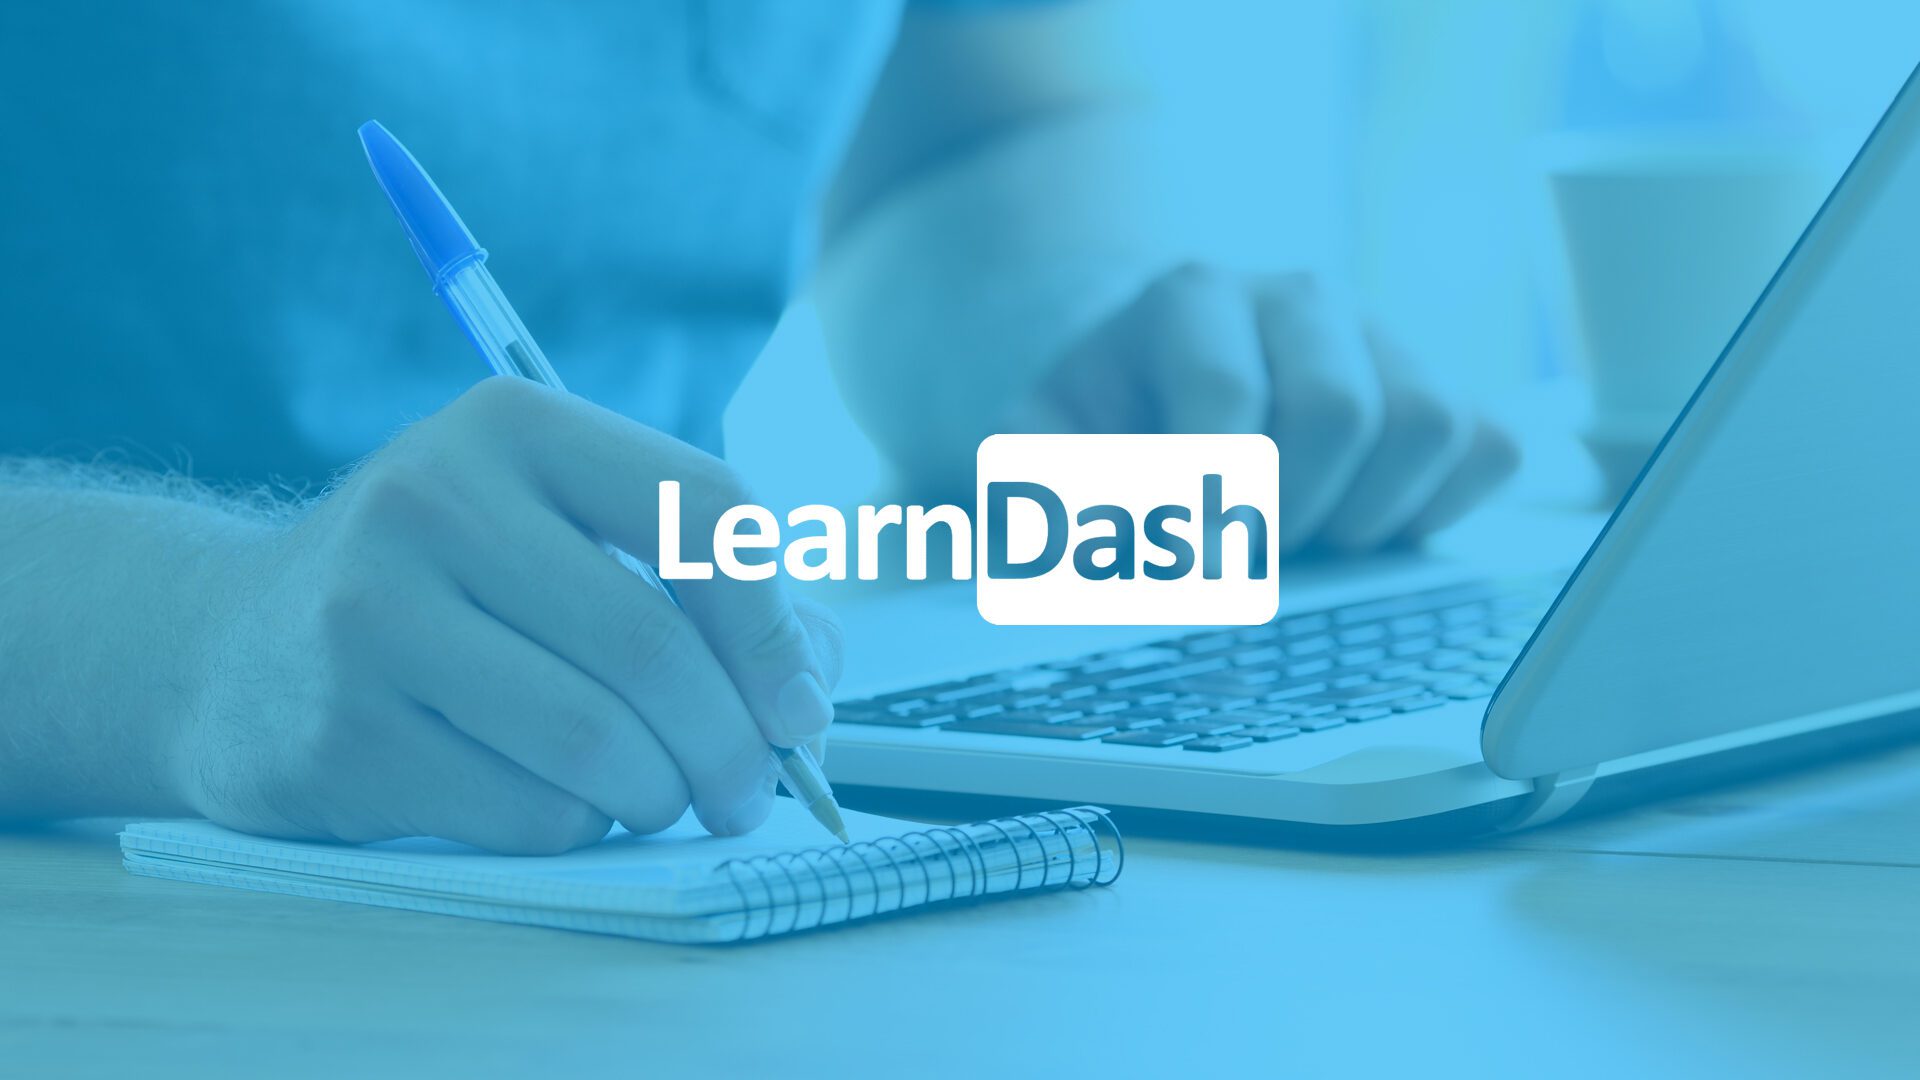 Creative Ways to Use LearnDash Solutions Amidst Covid-19 Pandemic